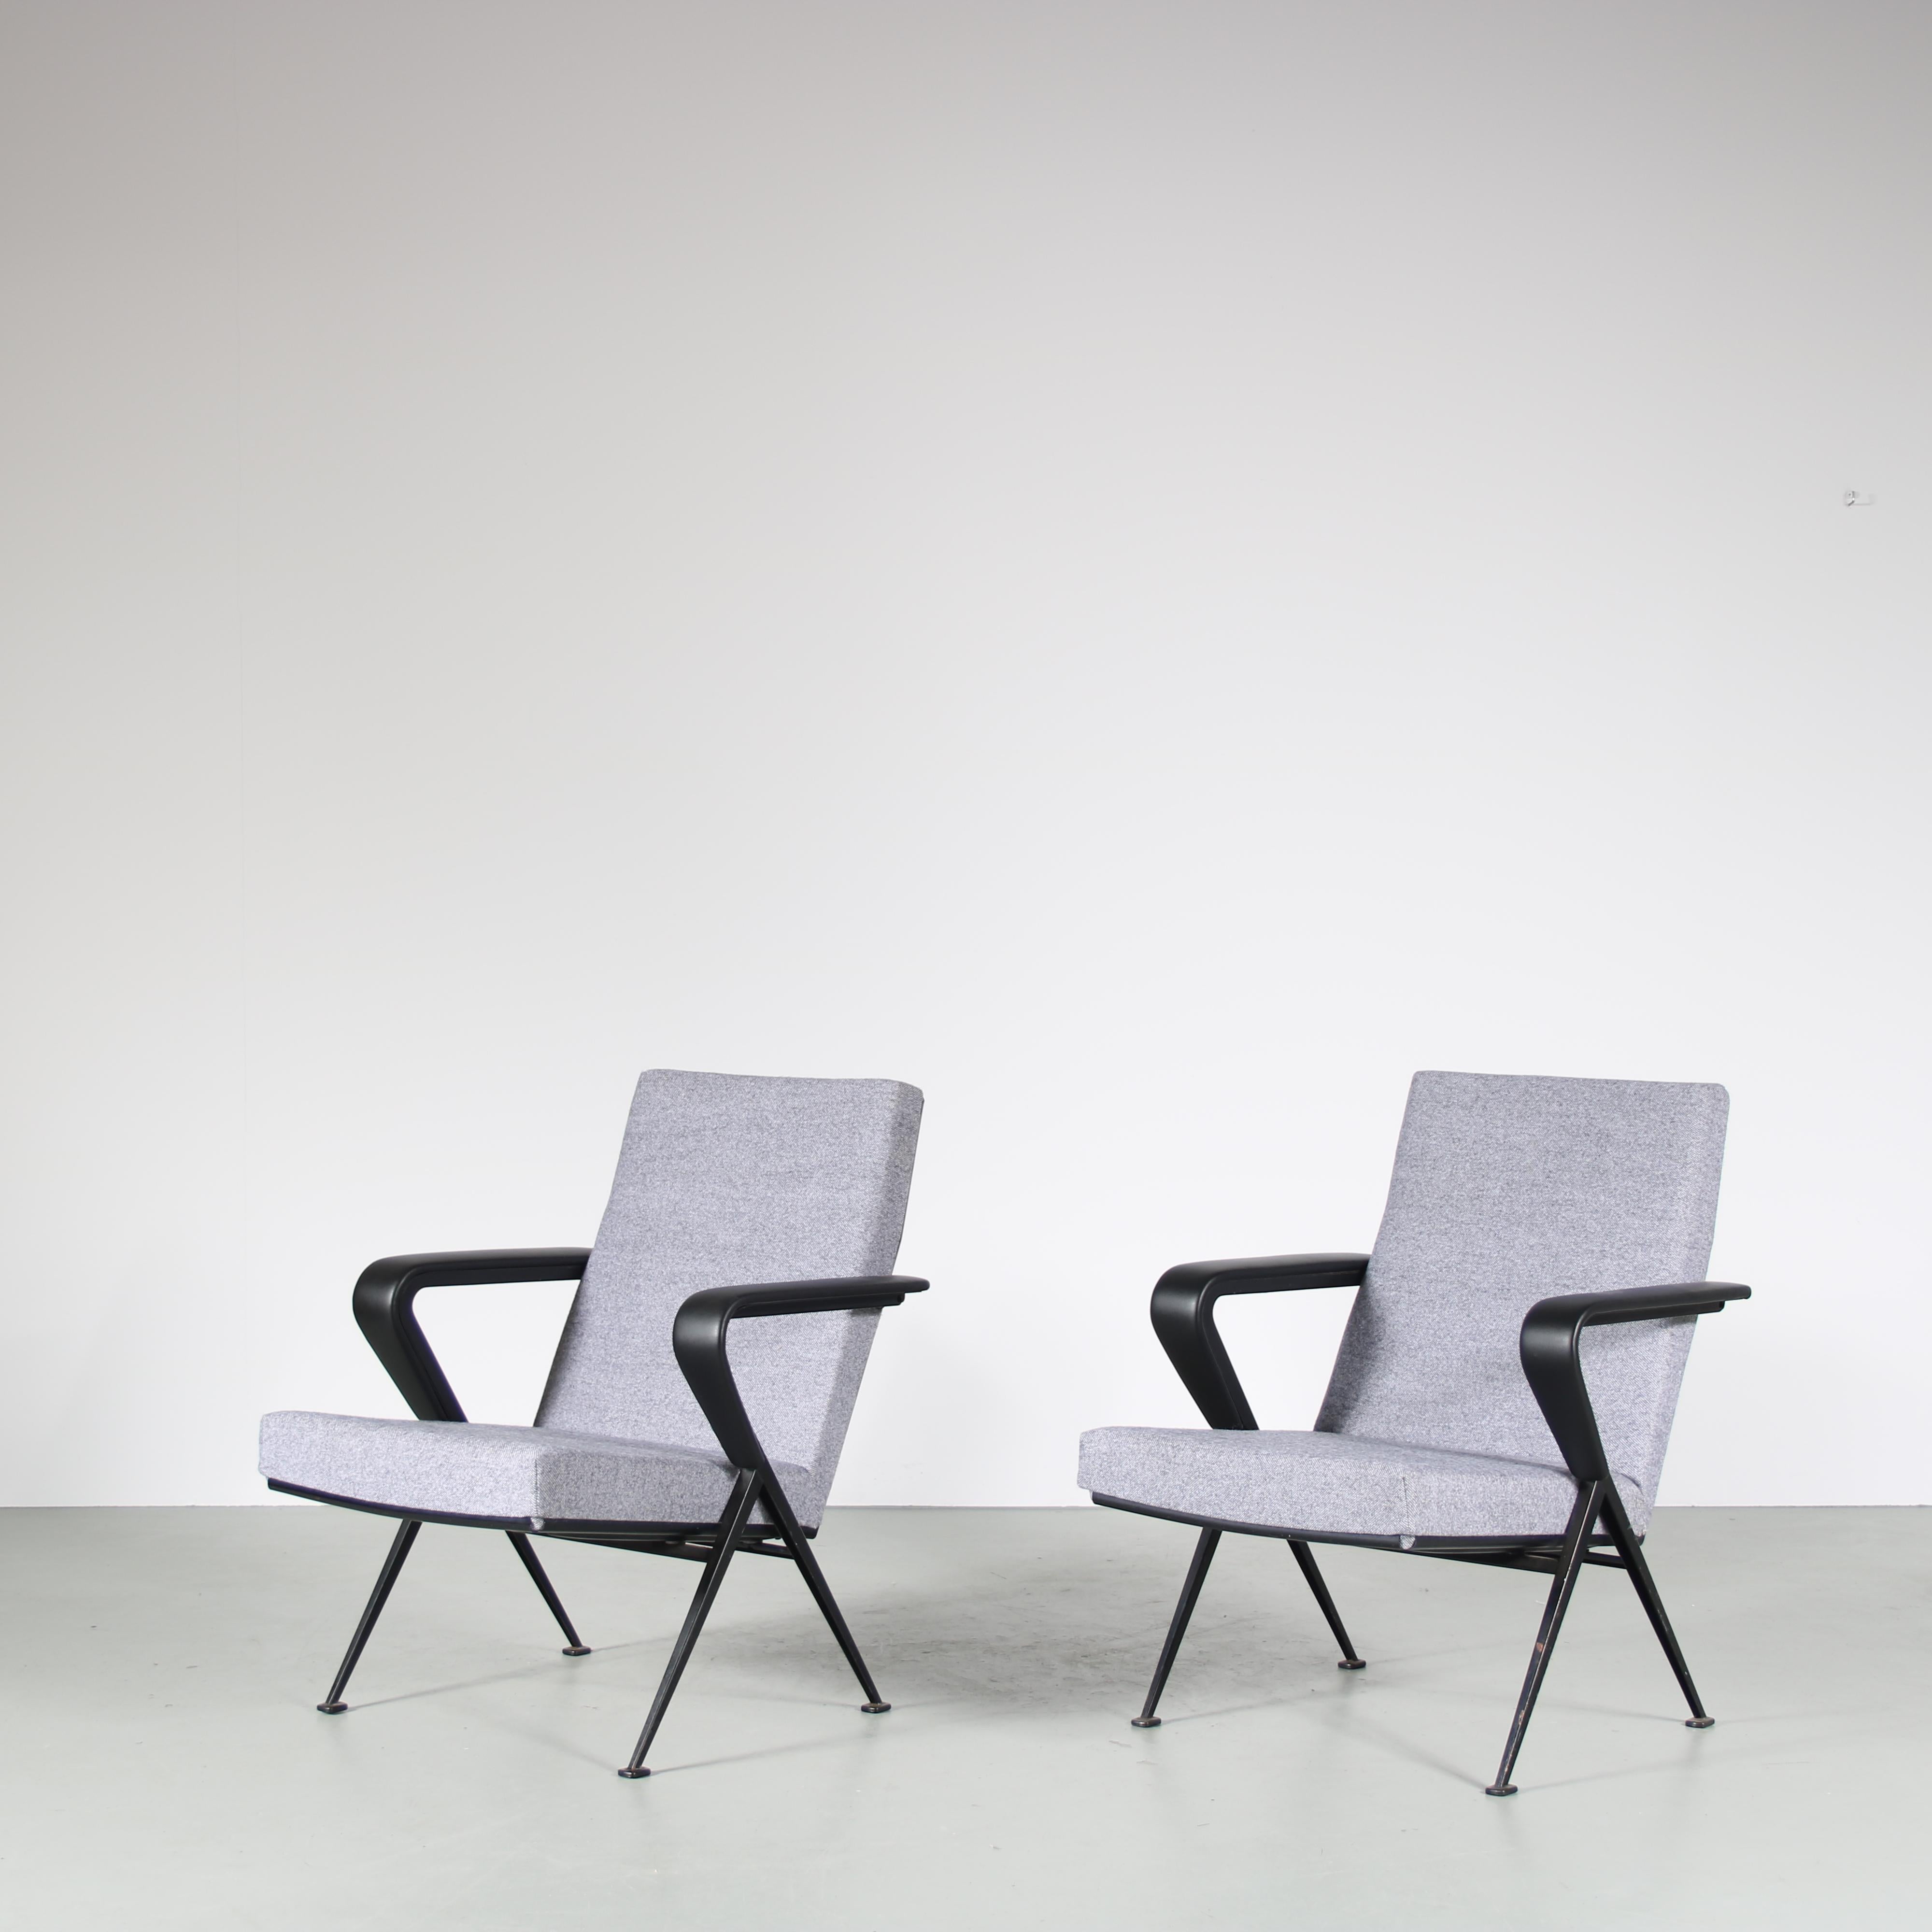 European 1960s Pair of “Repose” Chairs by Friso Kramer for Ahrend de Cirkel, Netherlands For Sale